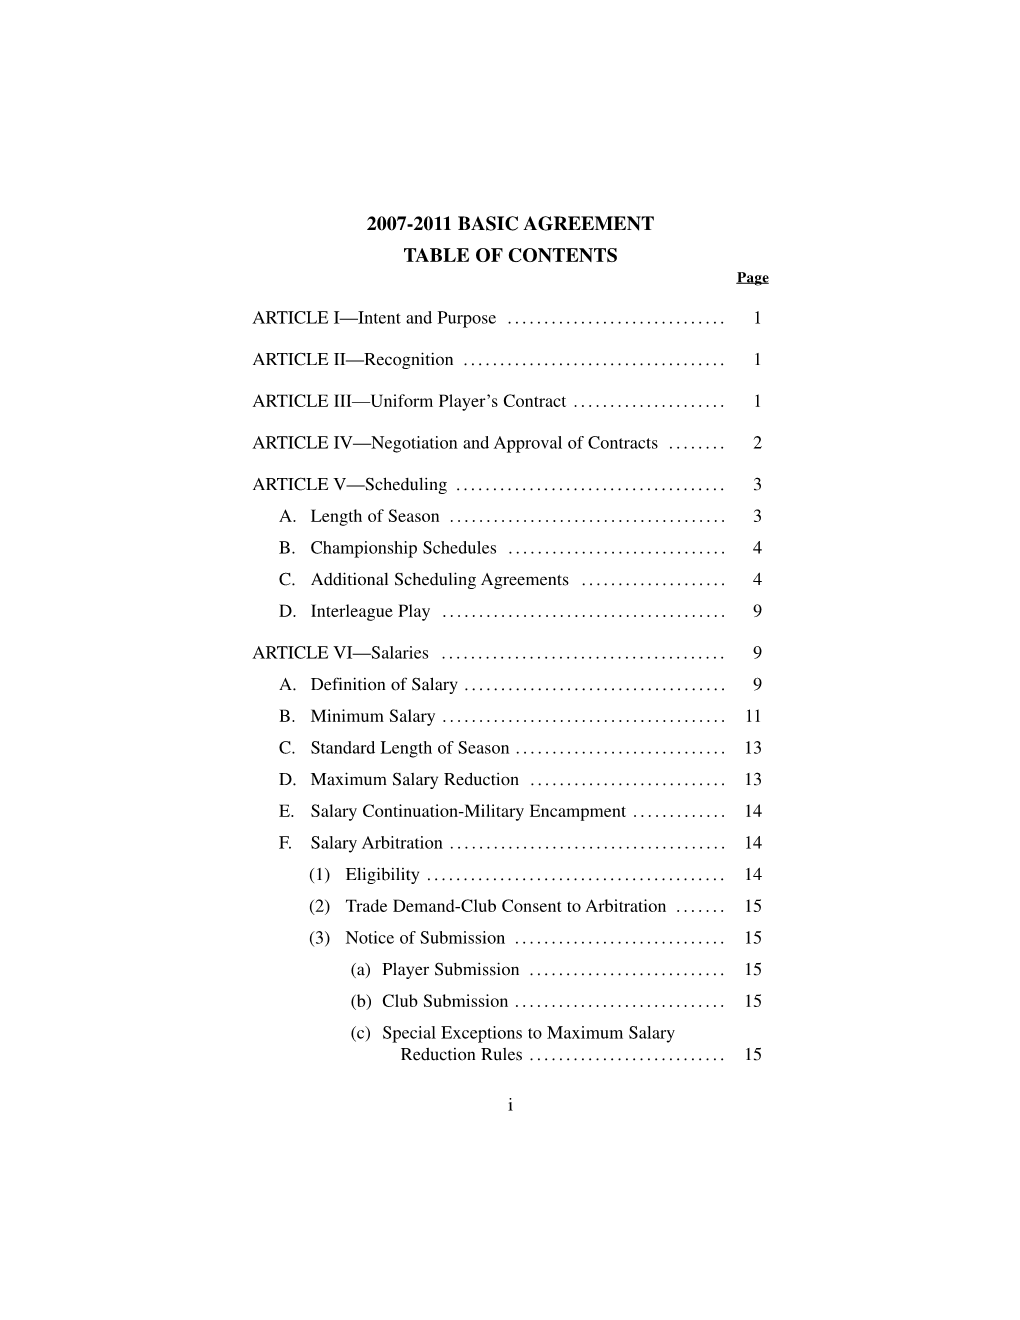 2007-11 Collective Bargaining Agreement (Pdf)